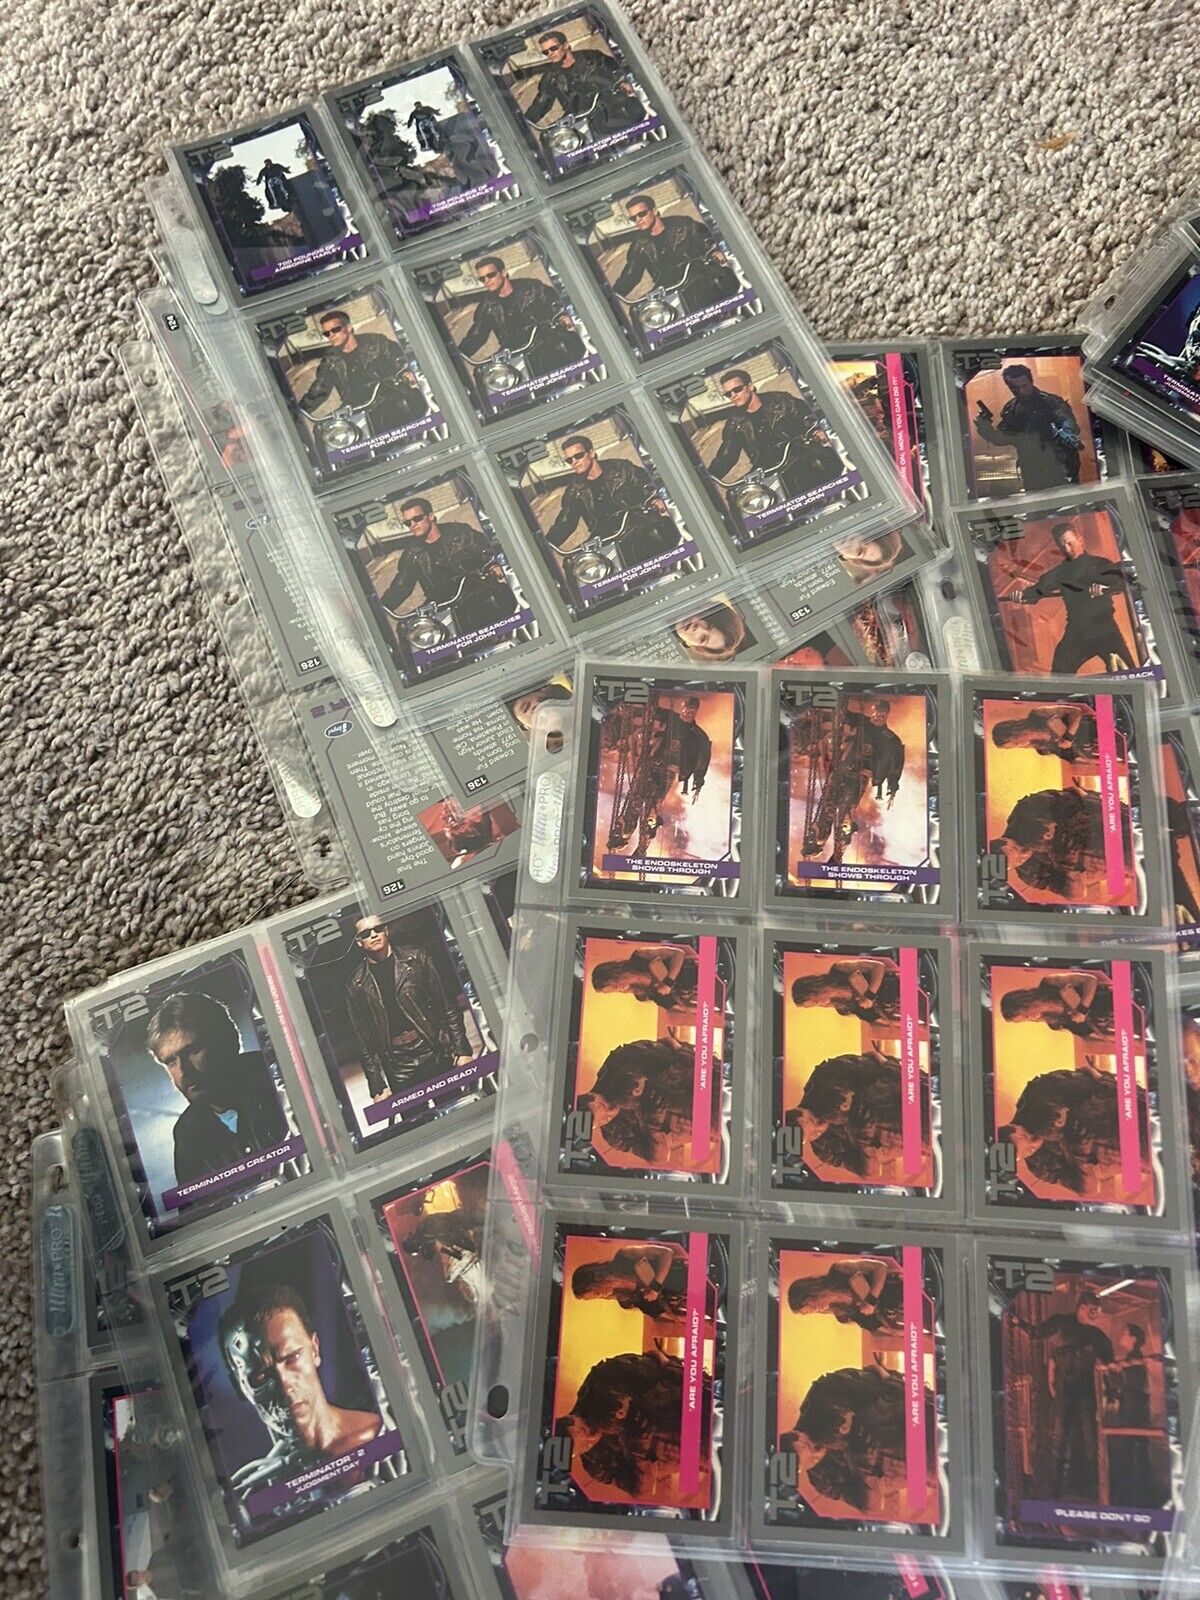 1991 TERMINATOR 2 JUDGMENT DAY TRADING CARDS Over Hundreds Of cards.